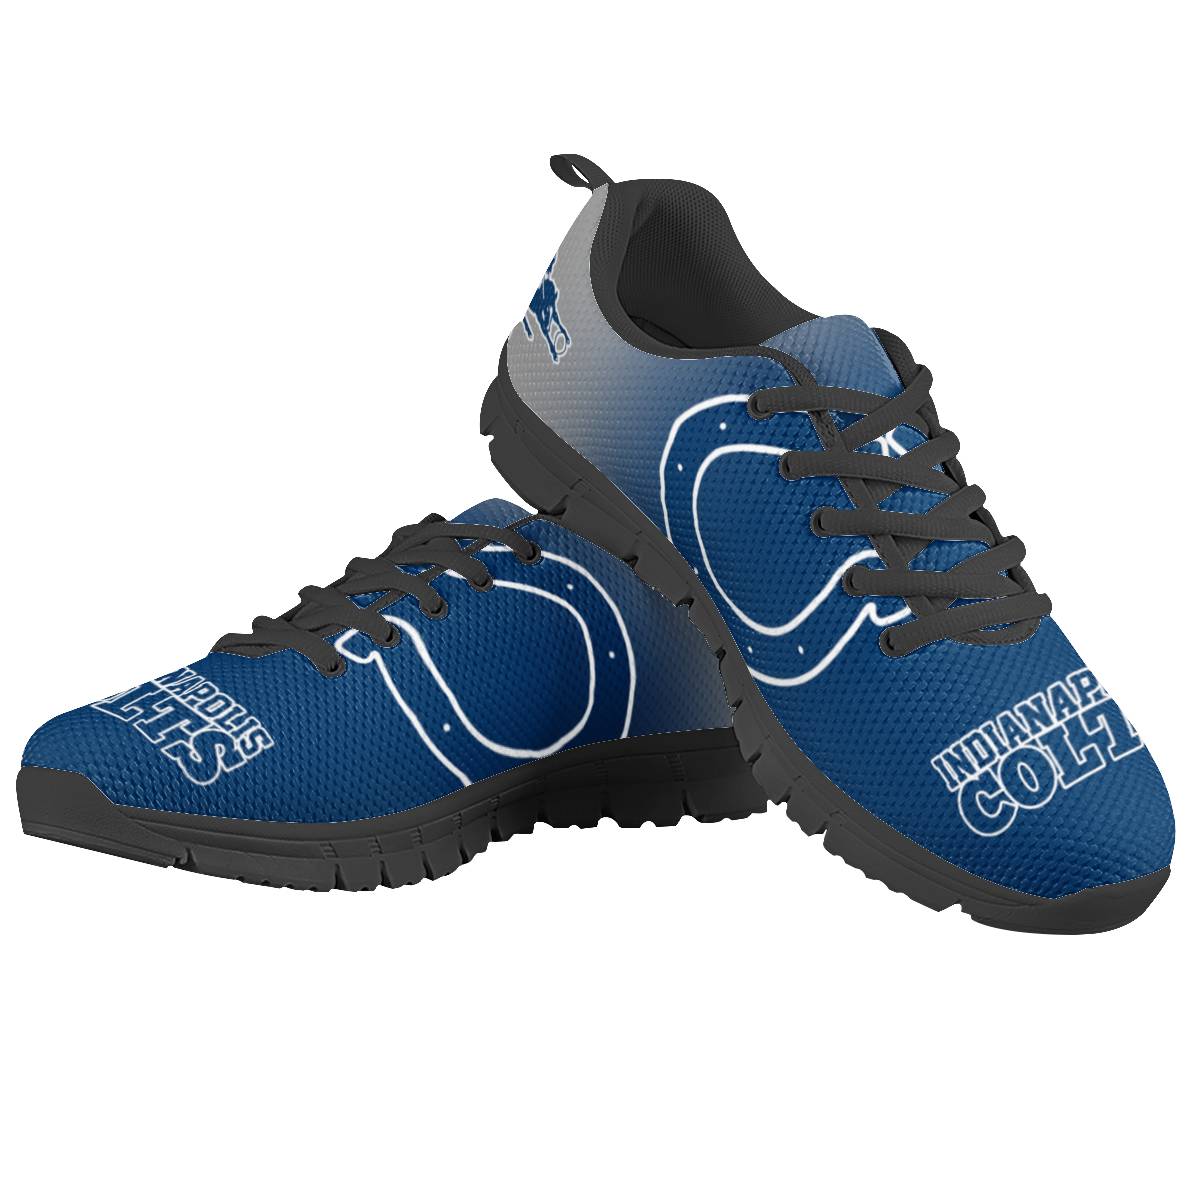 Men's Indianapolis Colts AQ Running Shoes 003